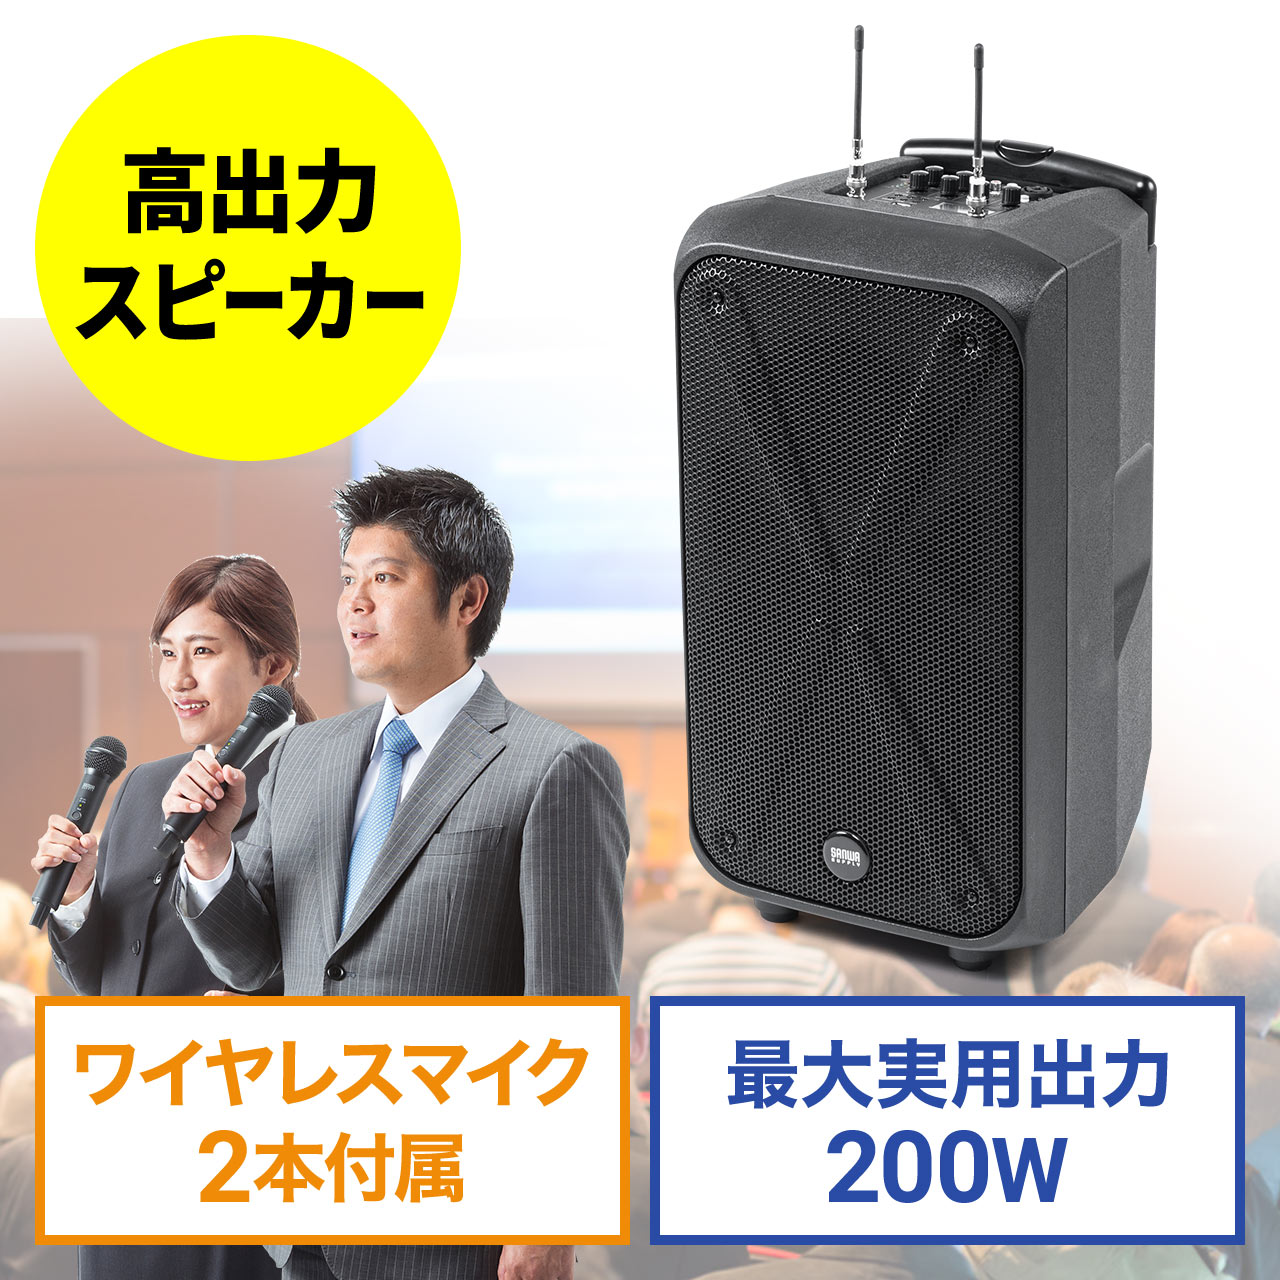 PC/タブレットoffice 2019 Home & Business  二枚セット